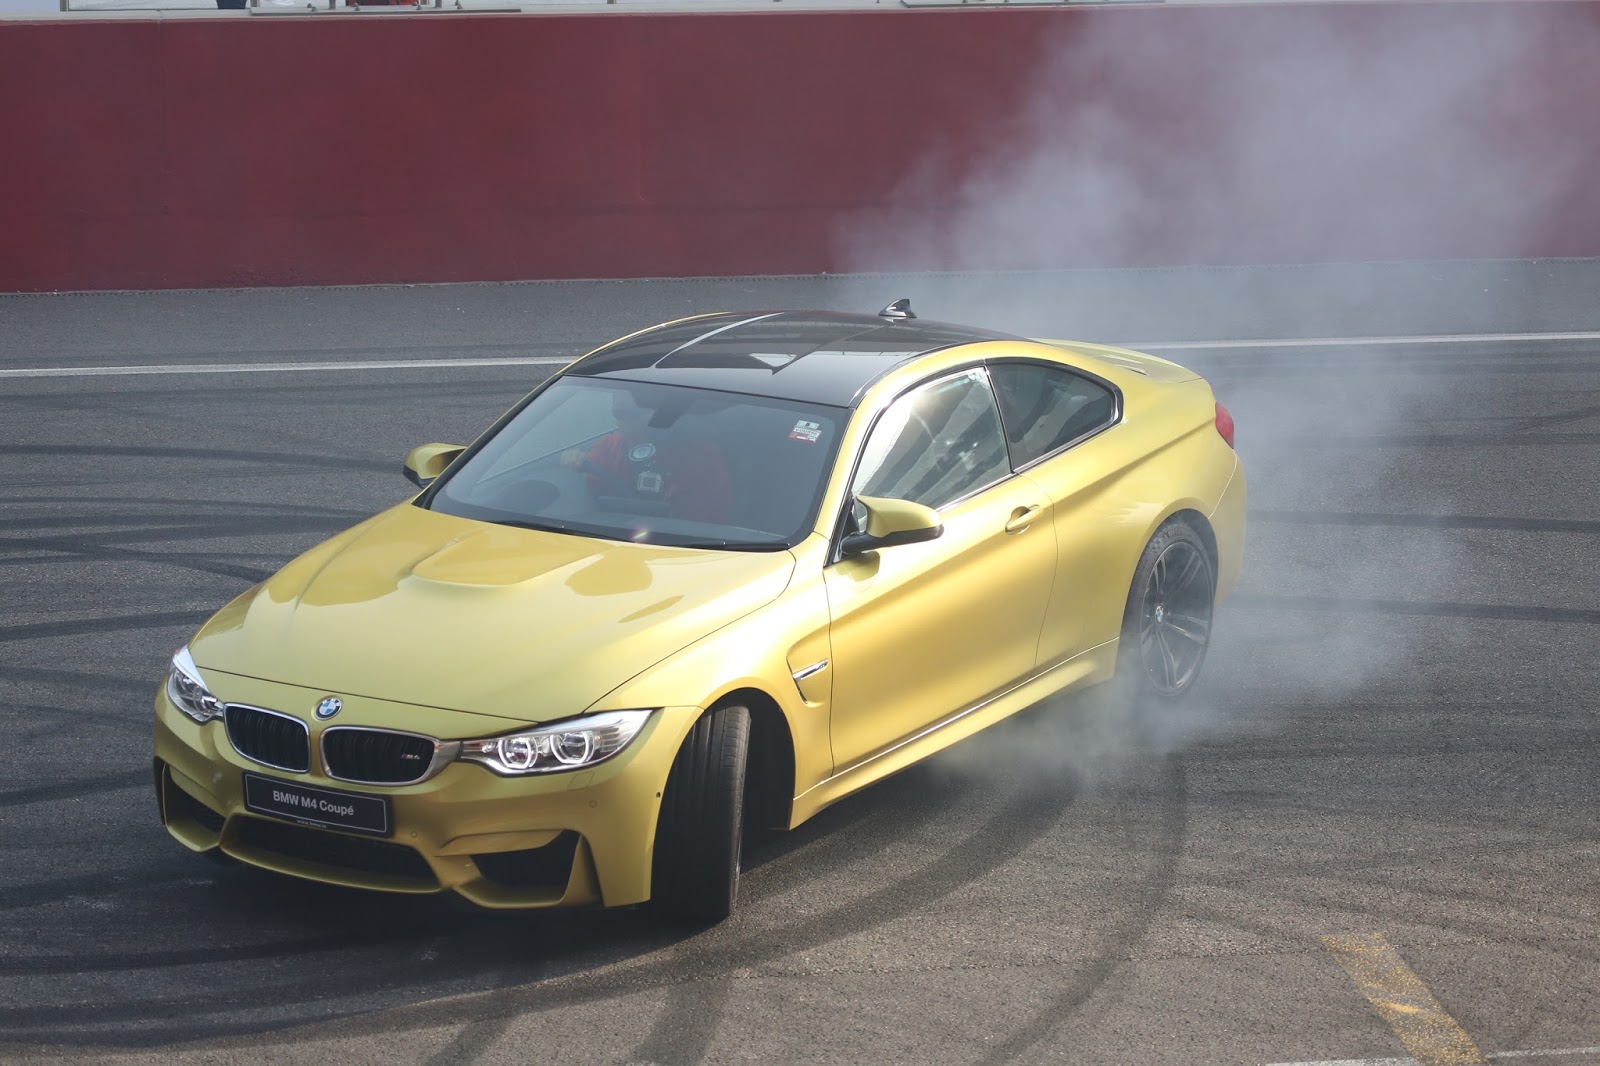 01.-The-BMW-M4-Coupé-in-action-